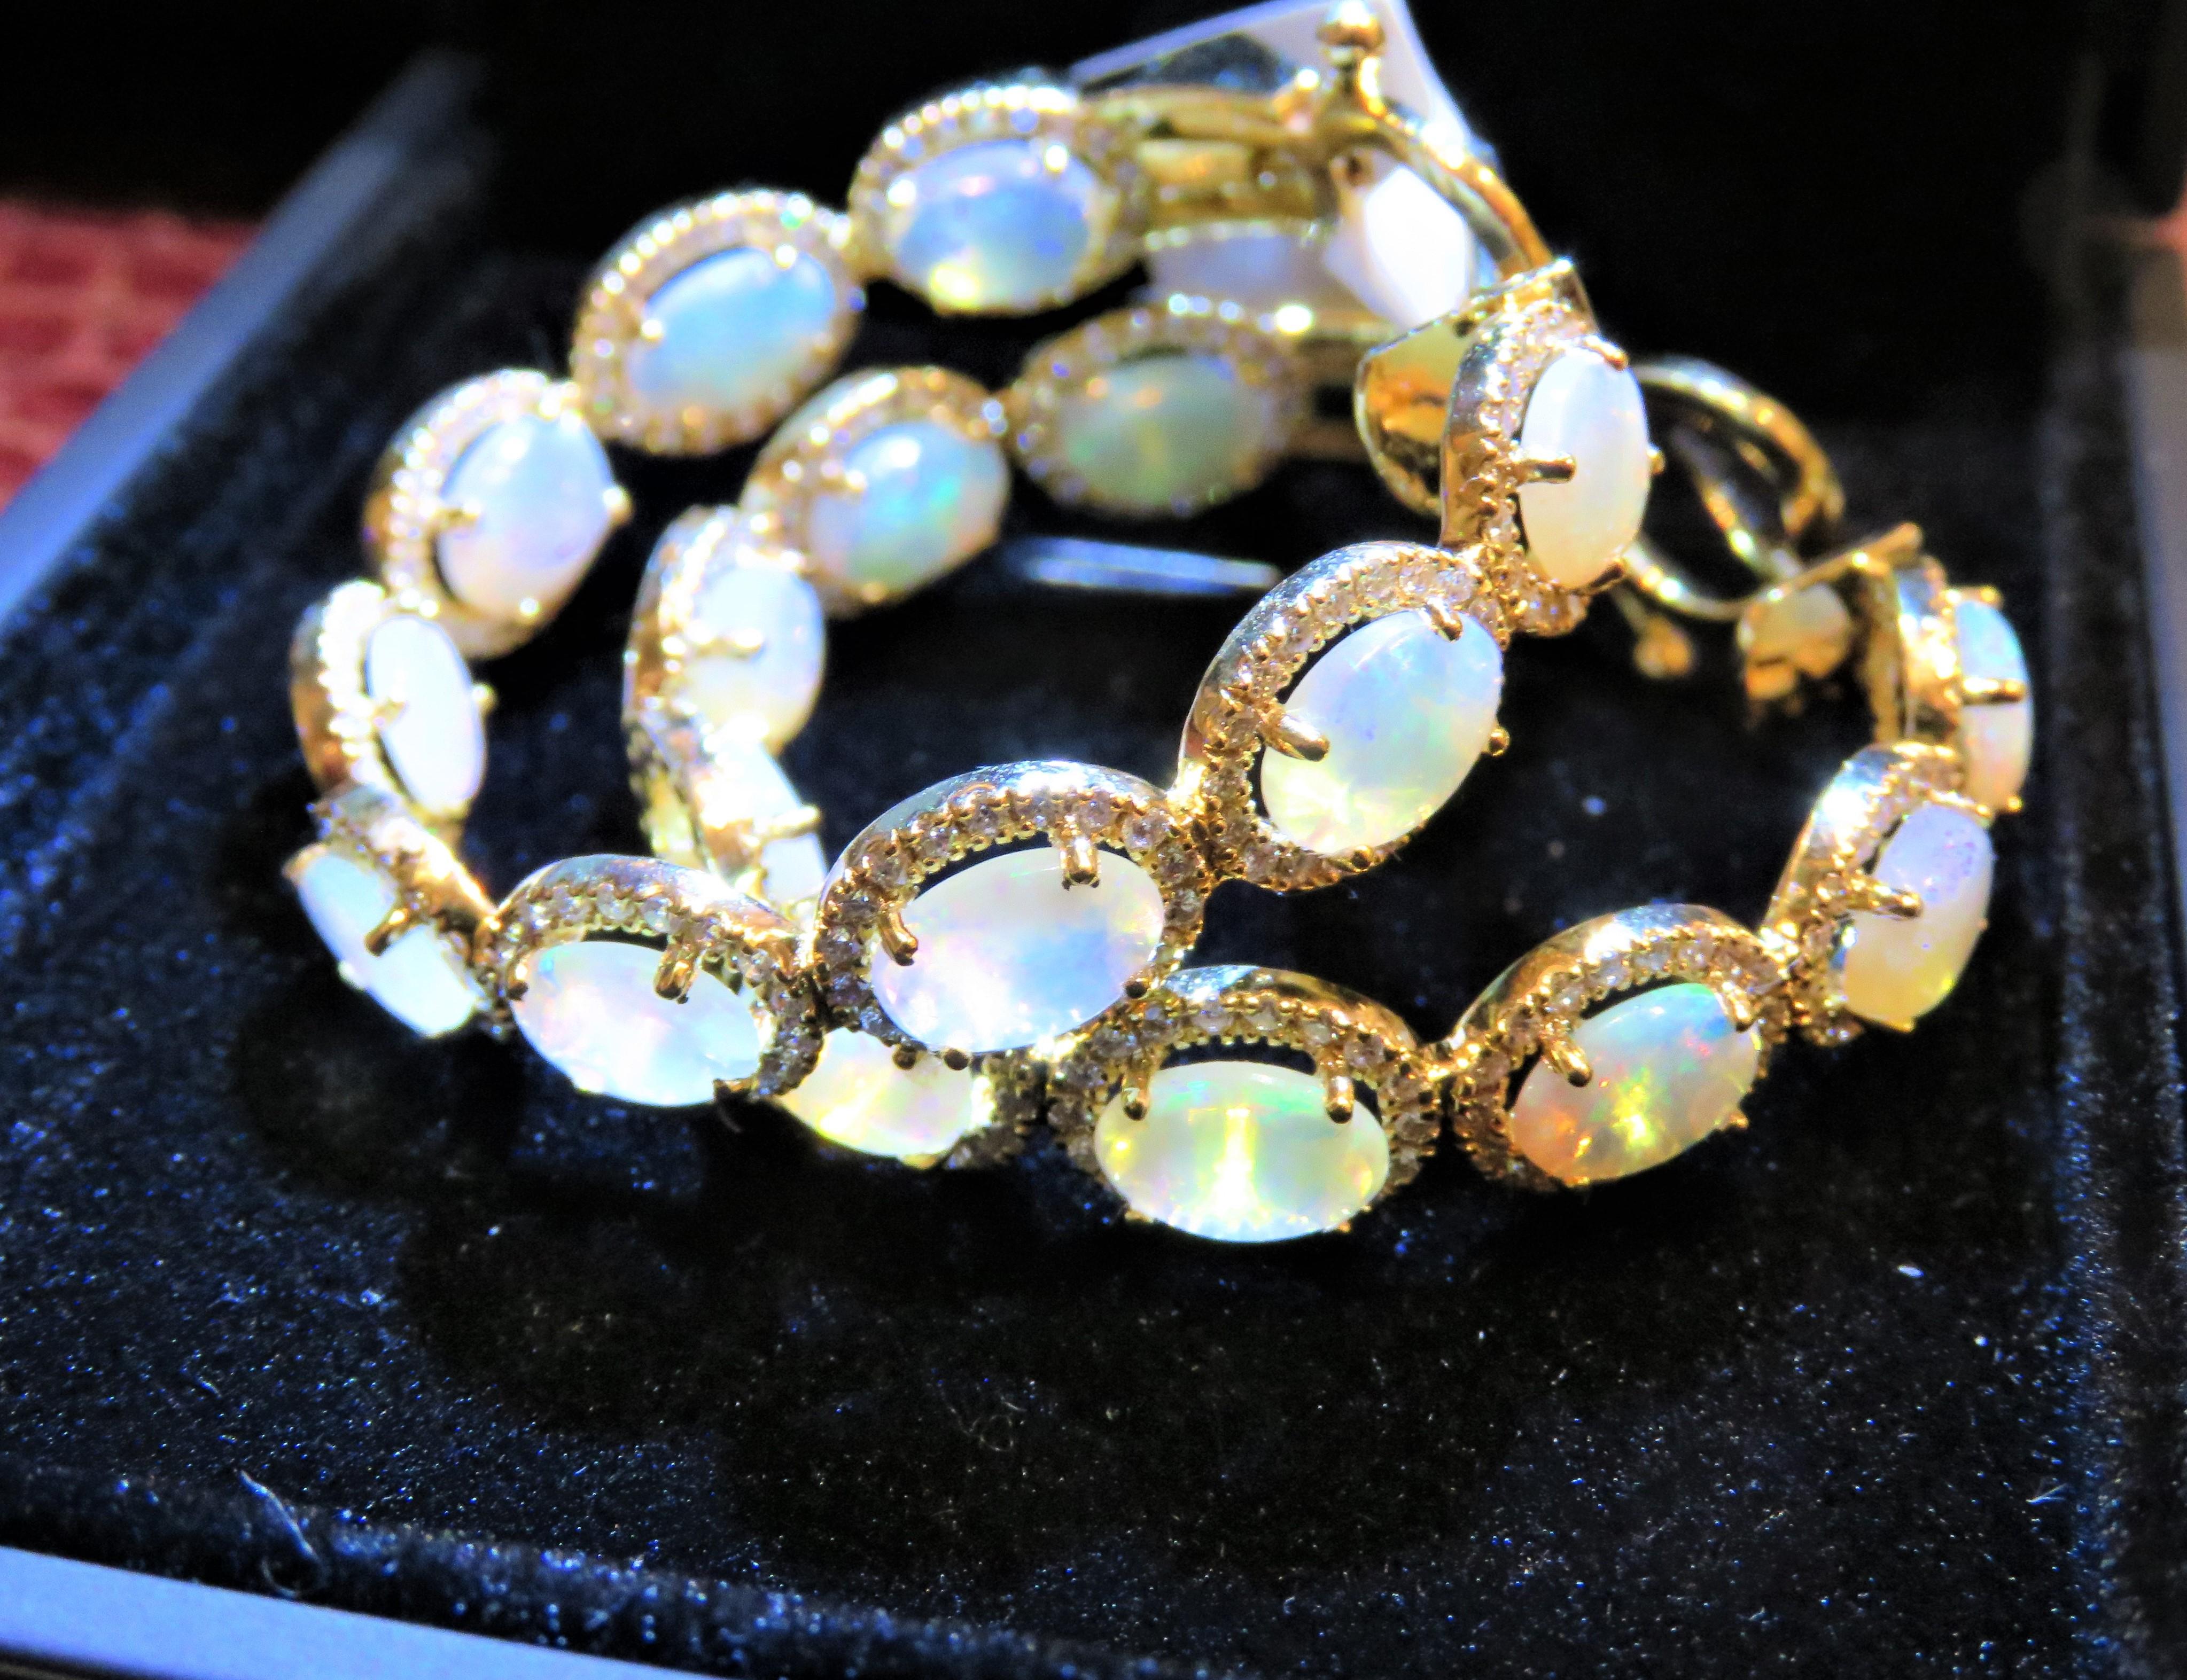 Mixed Cut NWT $12, 500 Magnificent 18KT Gold Large 9CT Fancy Opal Diamond Hoop Earrings For Sale